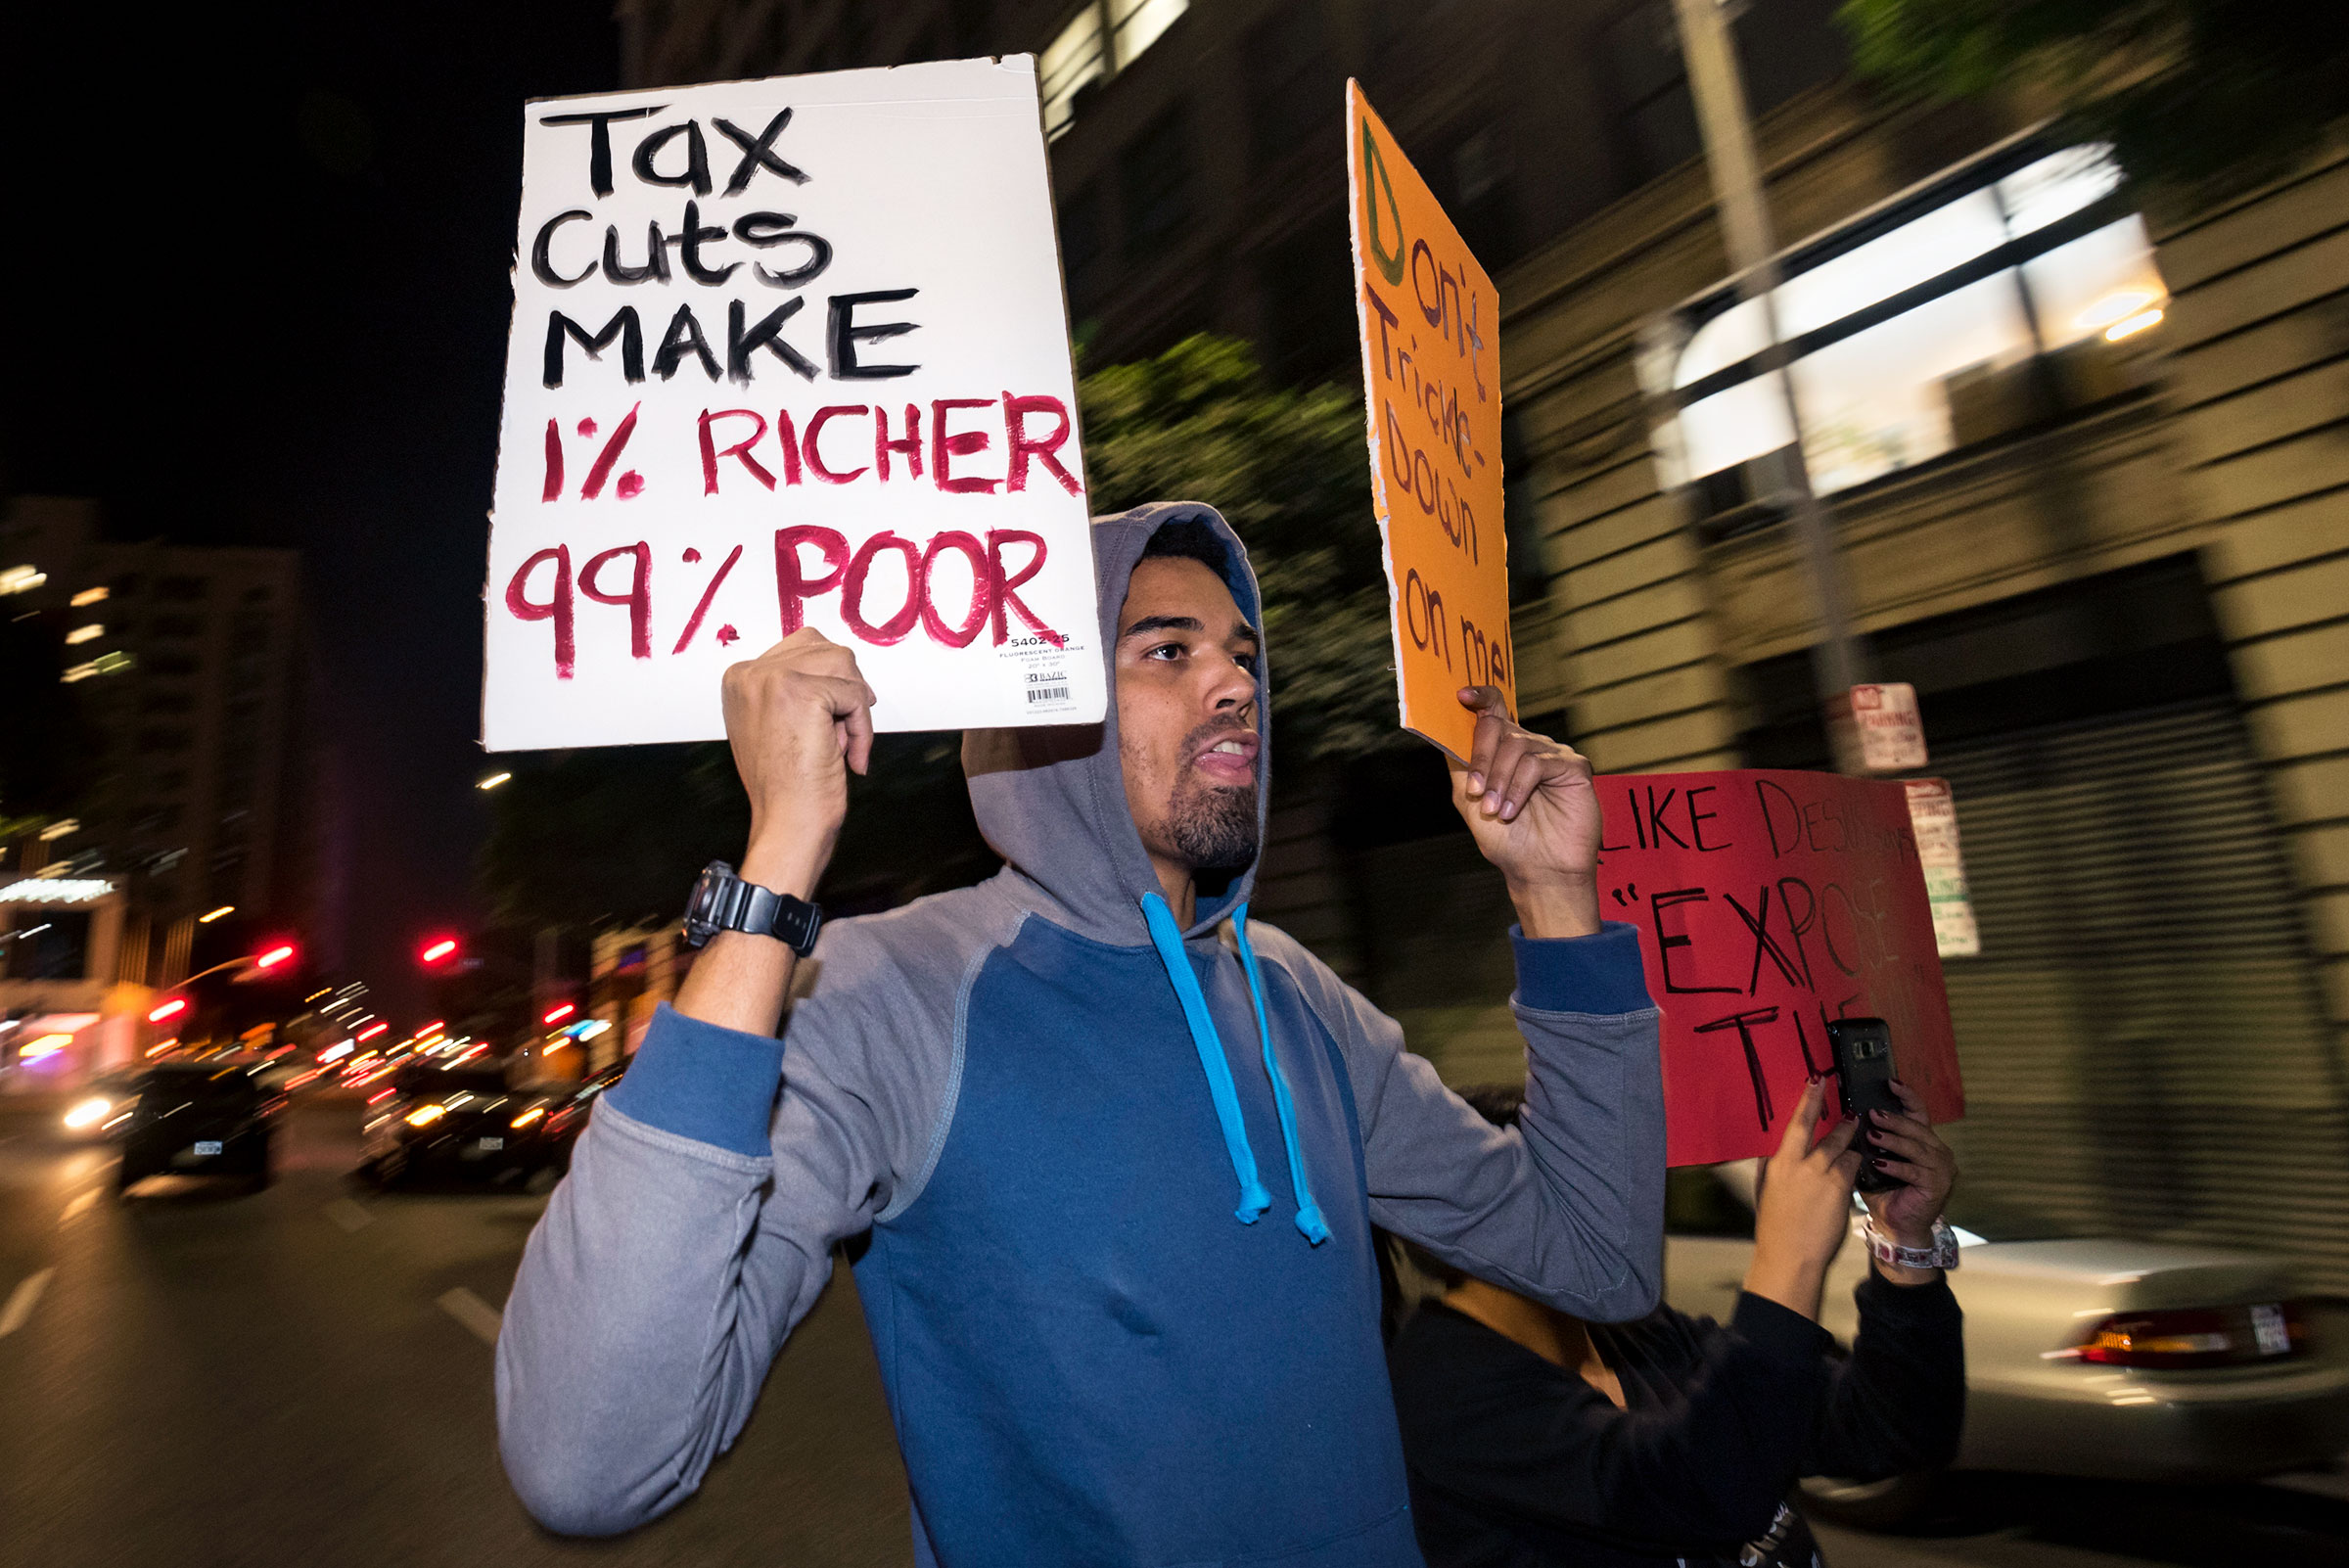 A protester holds a sign reading "TAX CUTS MAKE 1% RICHER, 99% POOR" during an outdoor protest